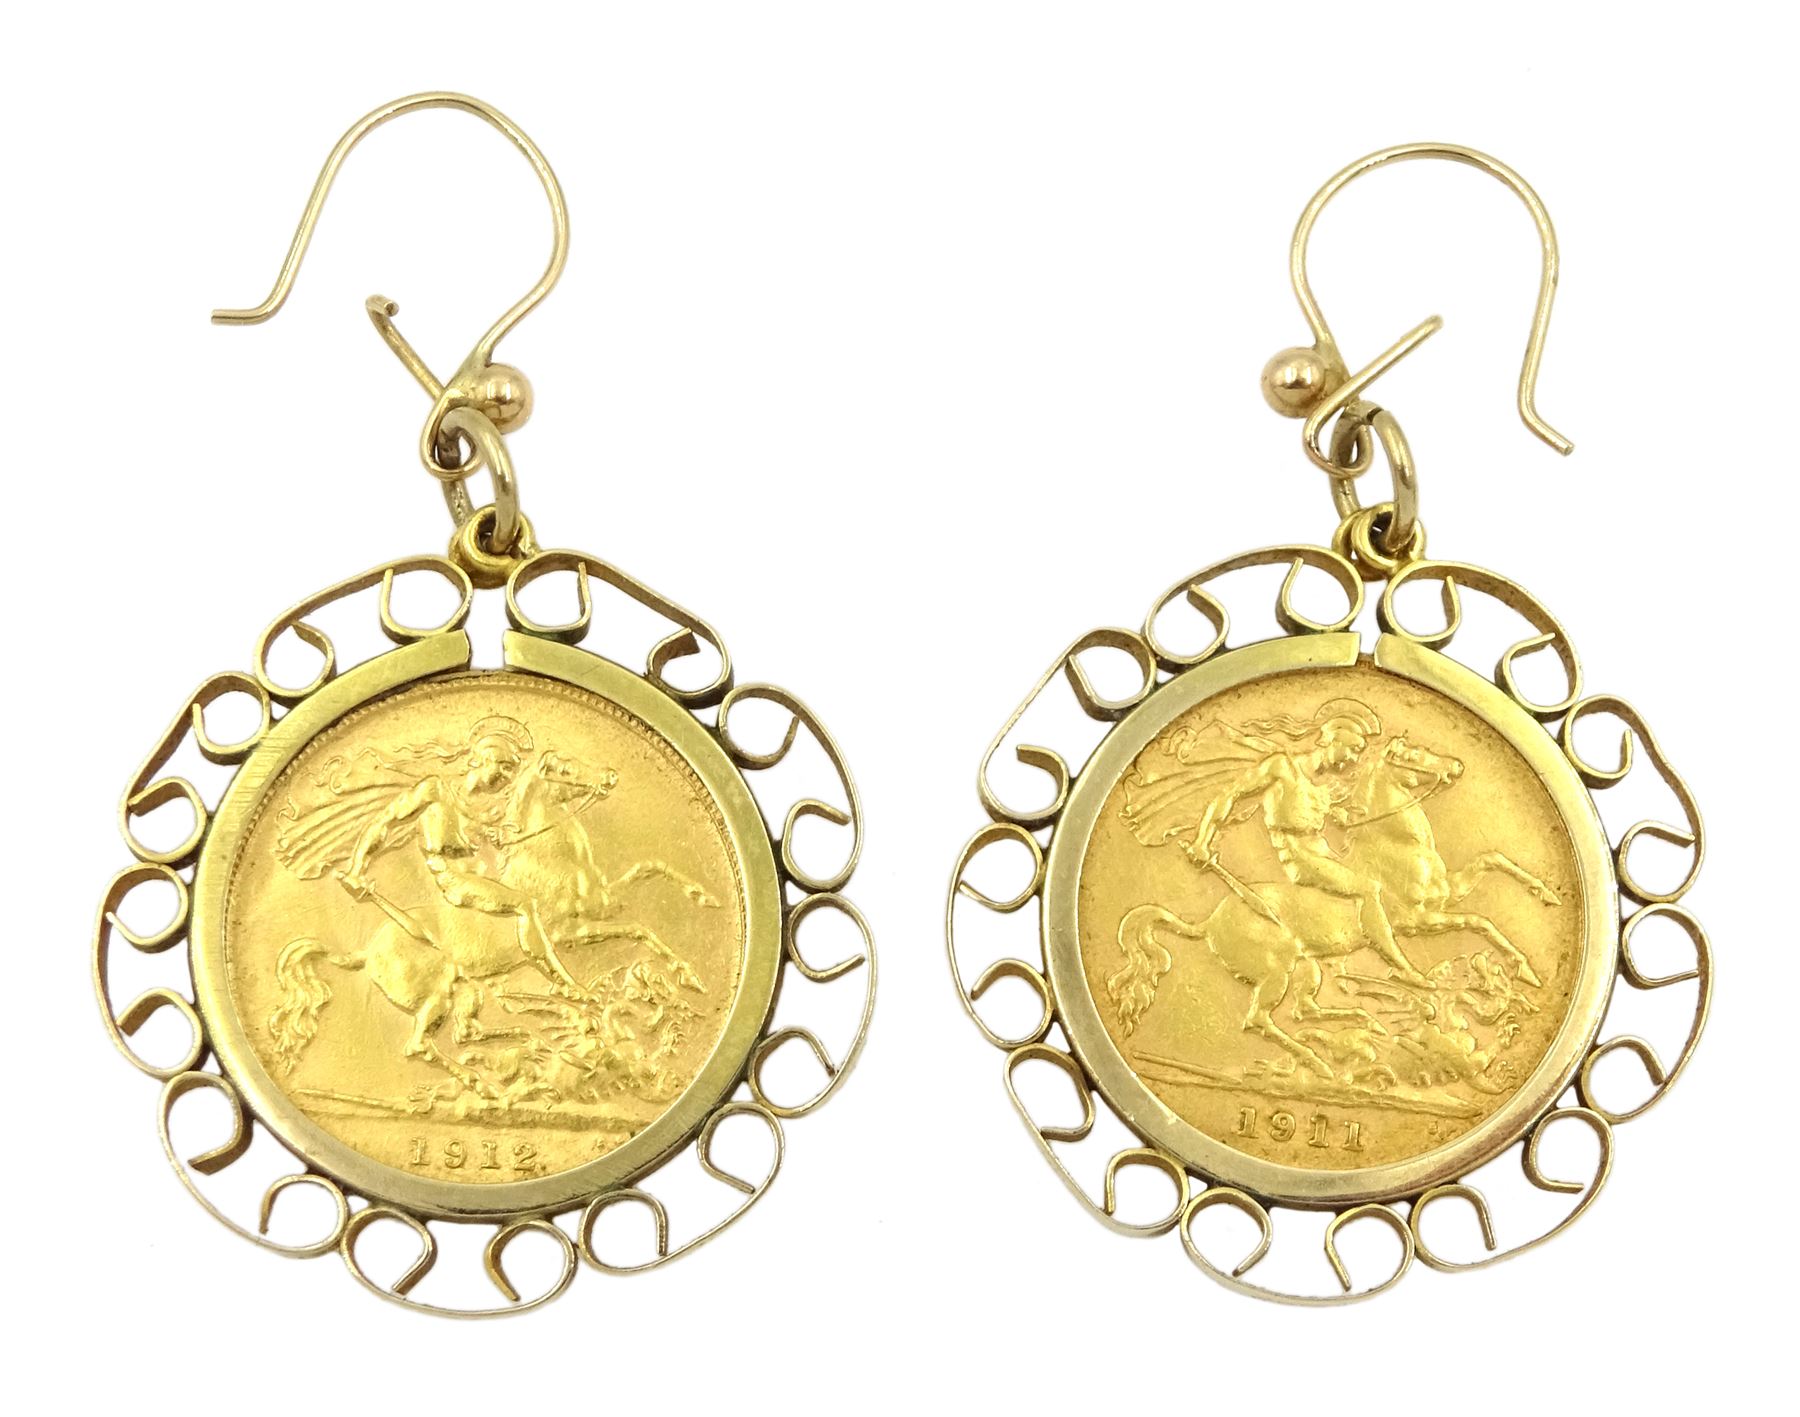 Two gold half sovereigns dated 1911 and 1912